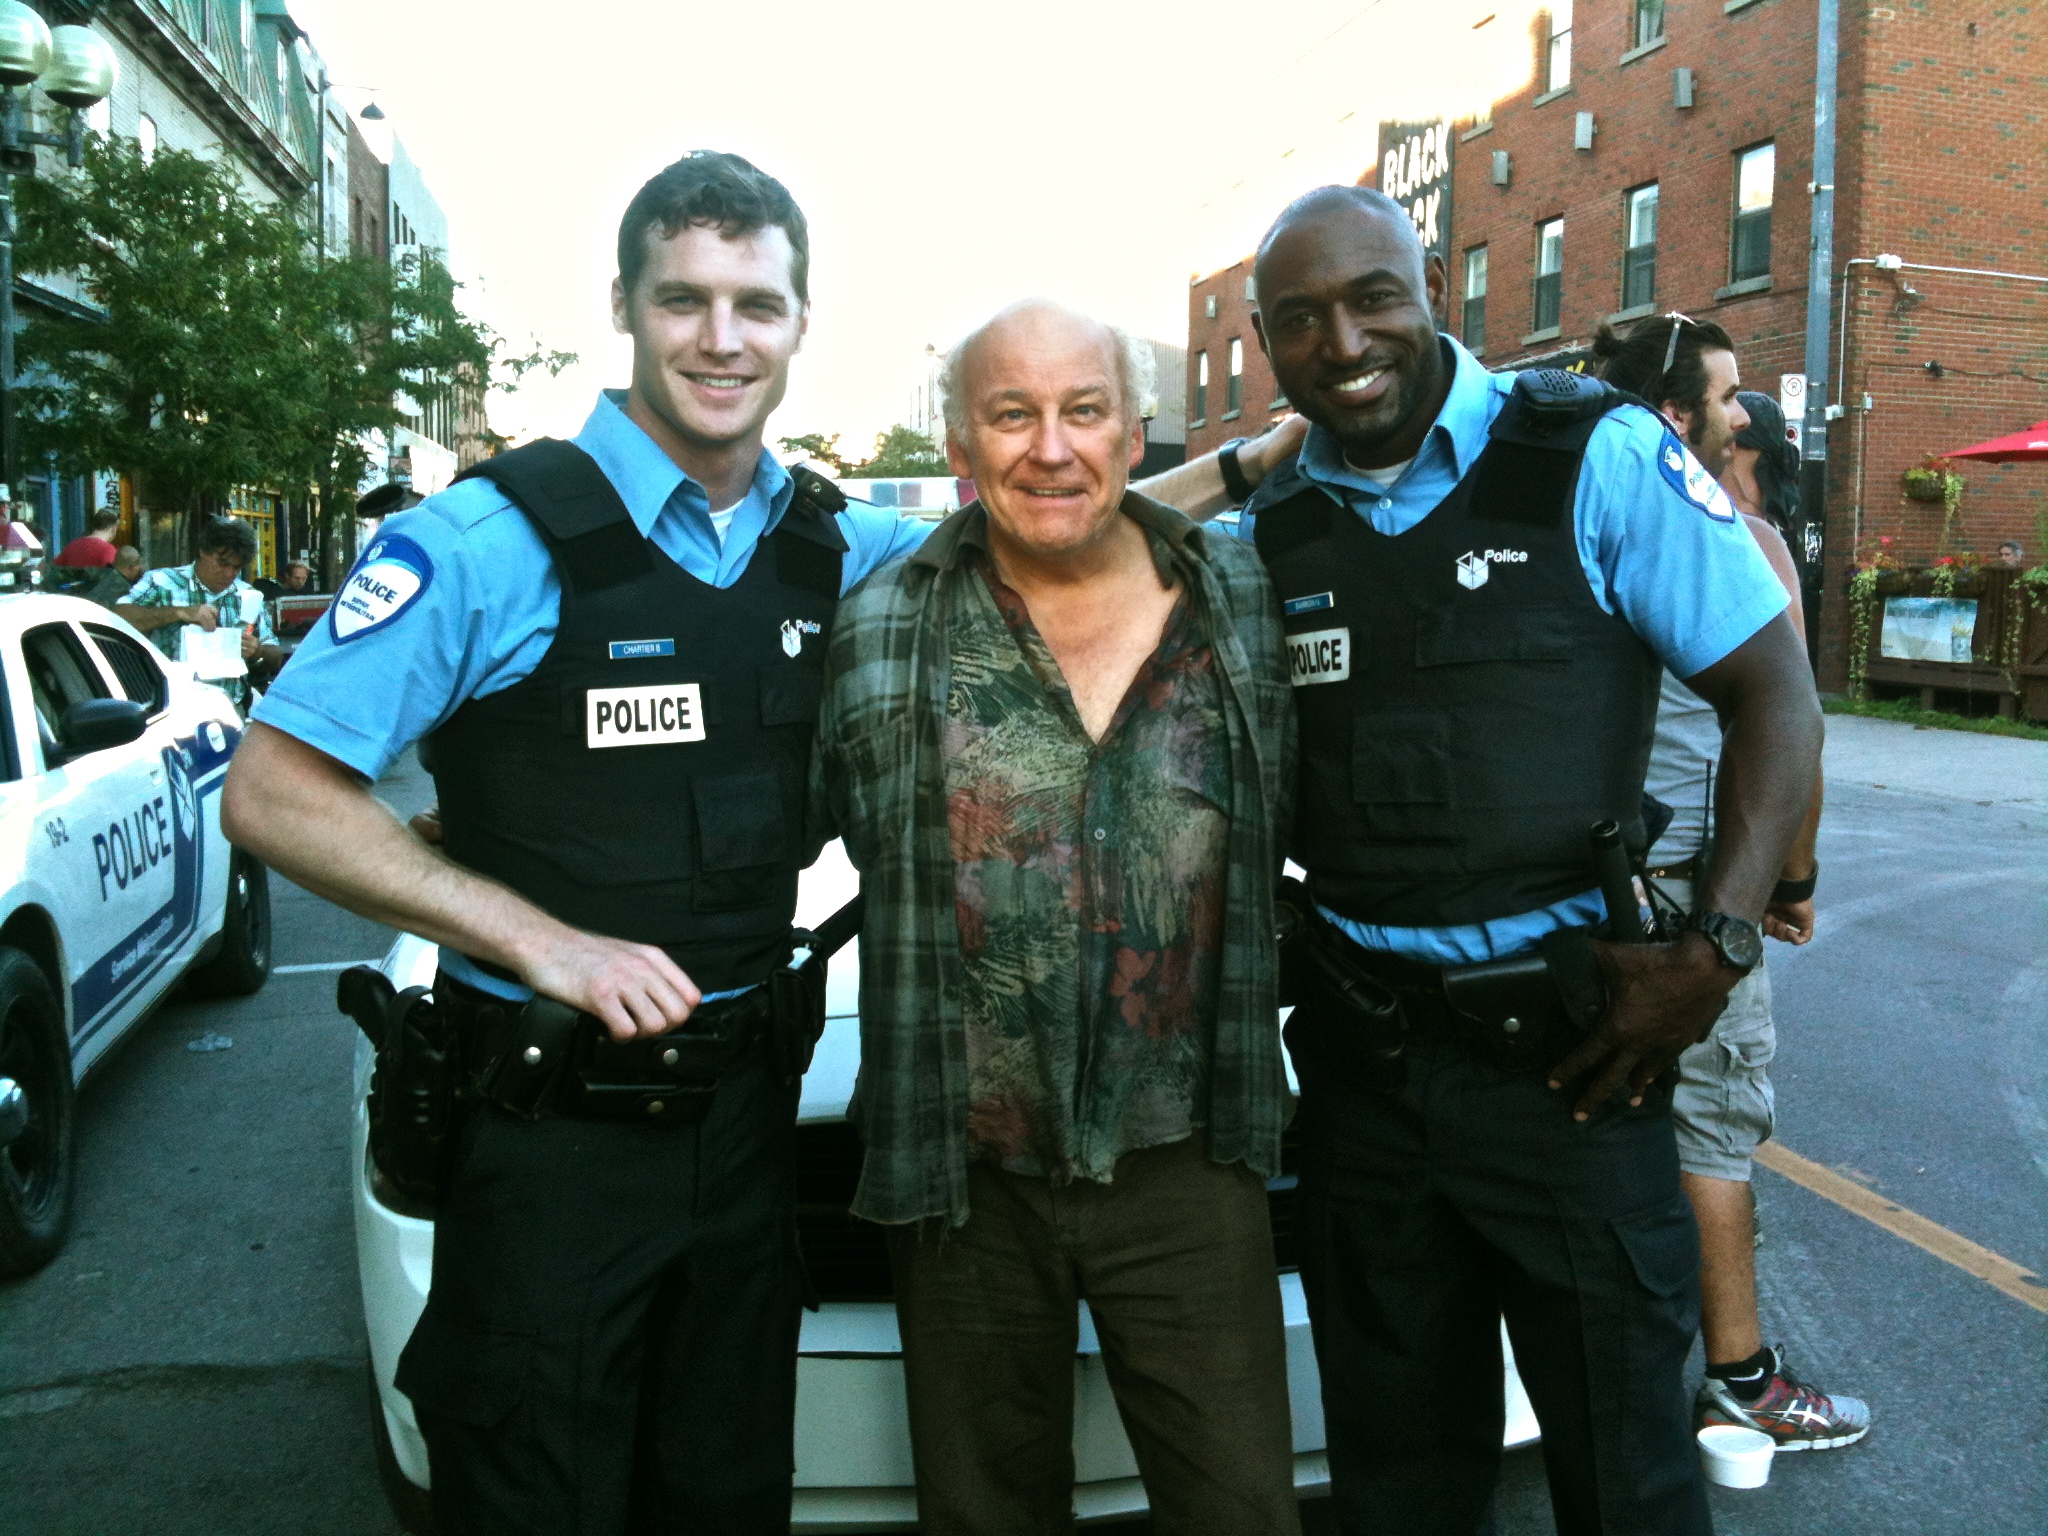 Jared Keeso and Adrian Holmes. Me and The Boys in Blue from BRAVO Canada's Hit TV Series: 19-2.